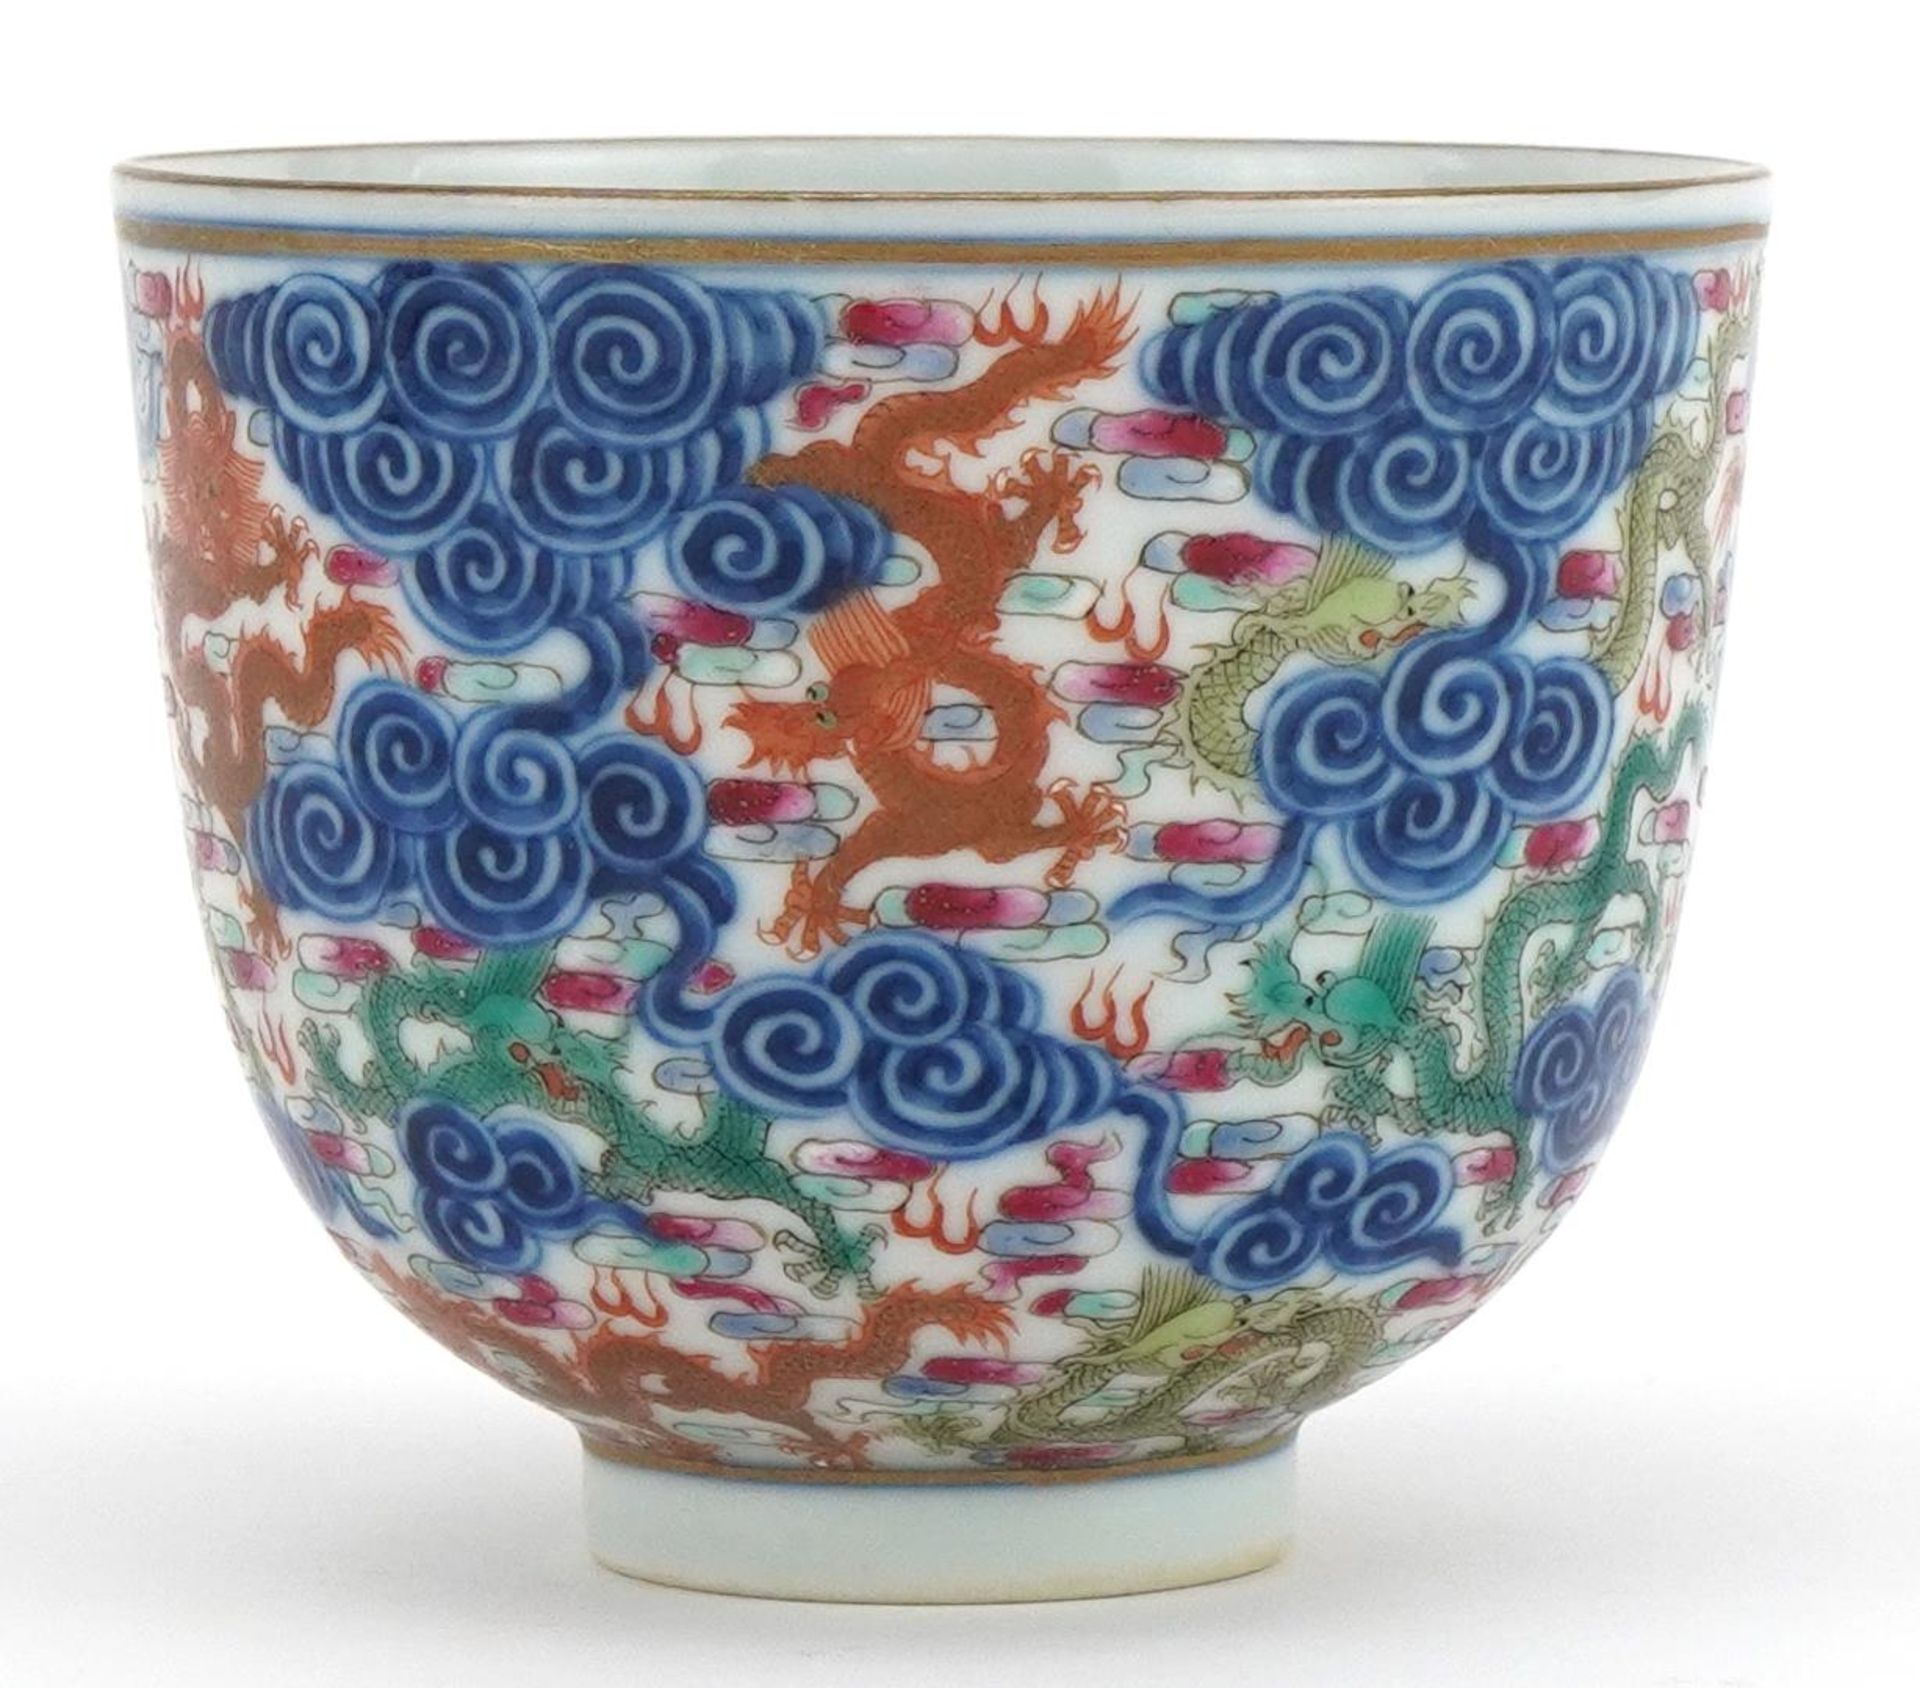 Chinese doucai porcelain tea bowl hand painted with dragons amongst clouds, six figure character